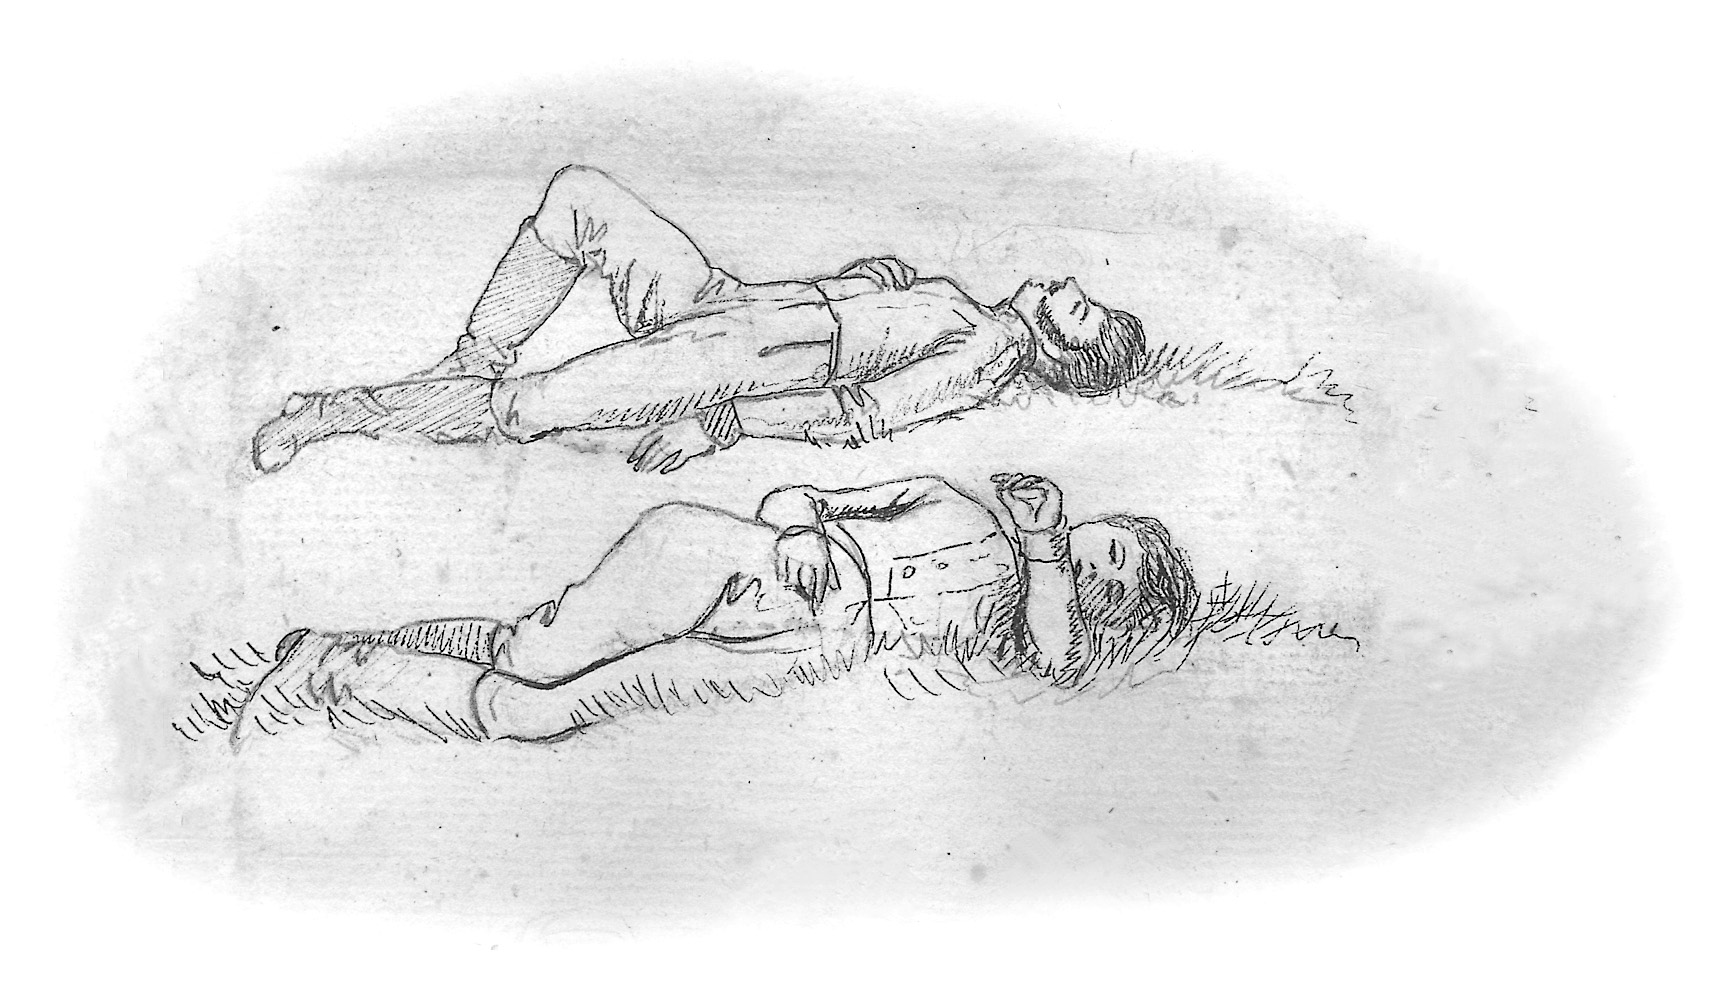 A German lieutenant made this sketch of two fallen soldiers after the battle.